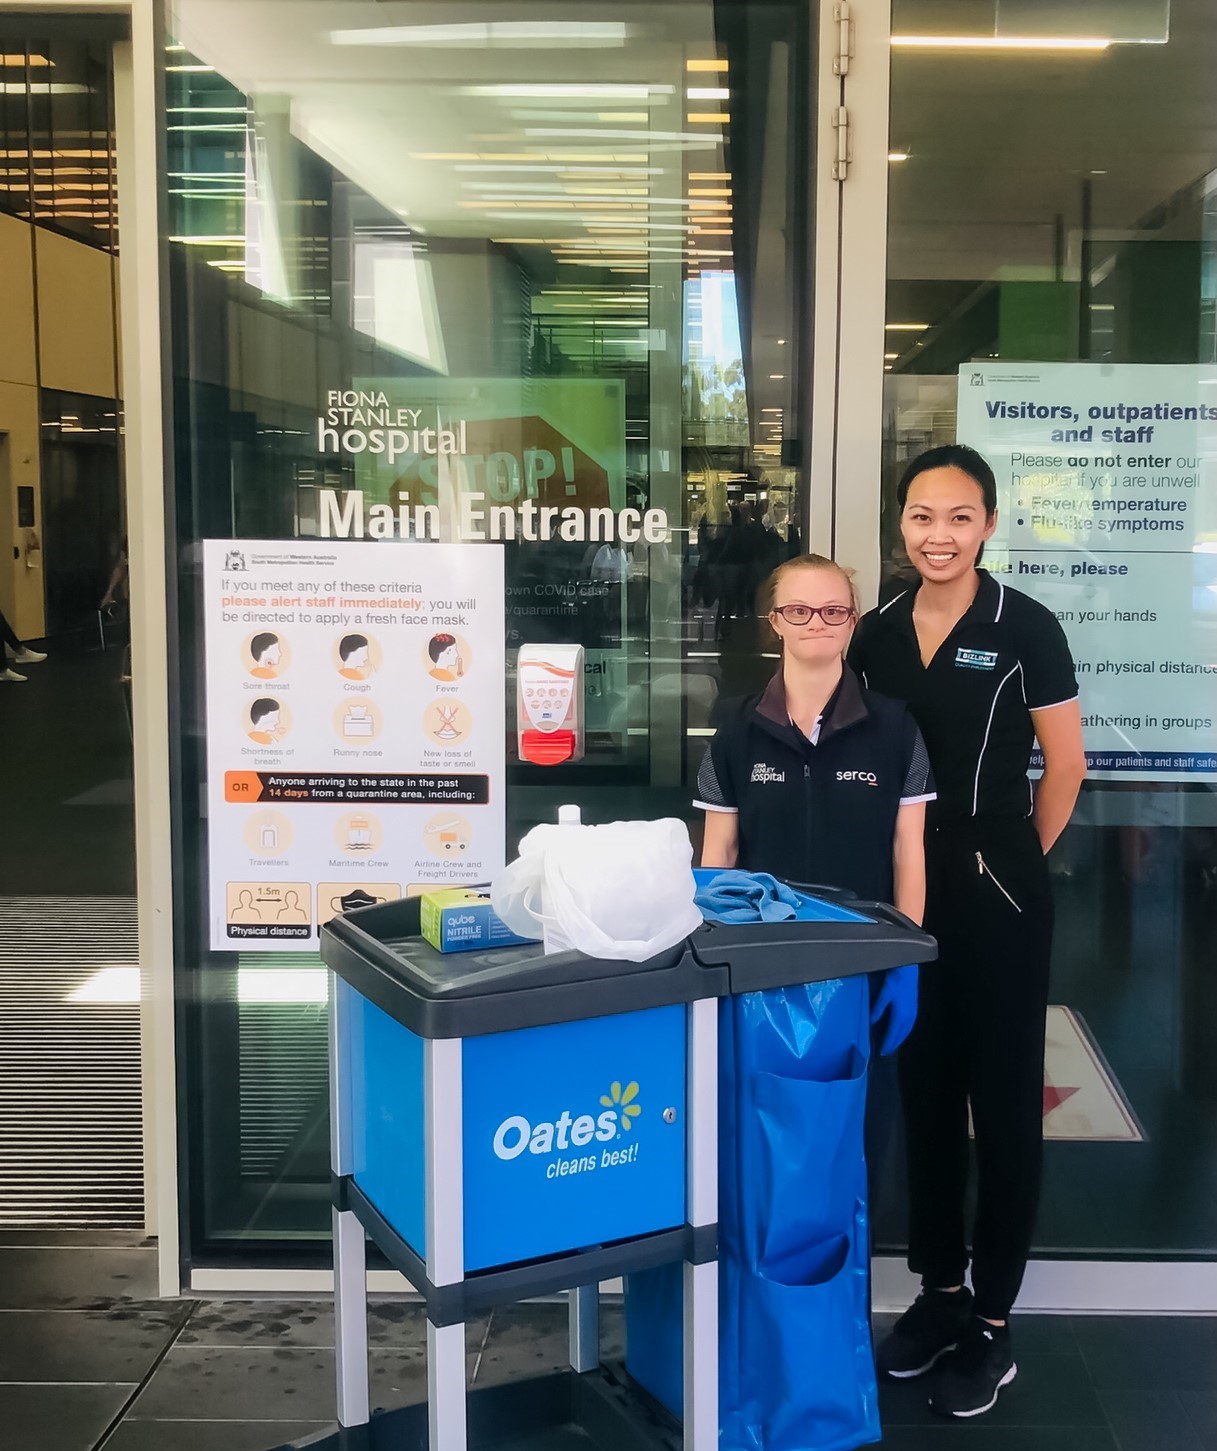 Sarah and her boss standing behind a cleaning trolley in front of a hospital